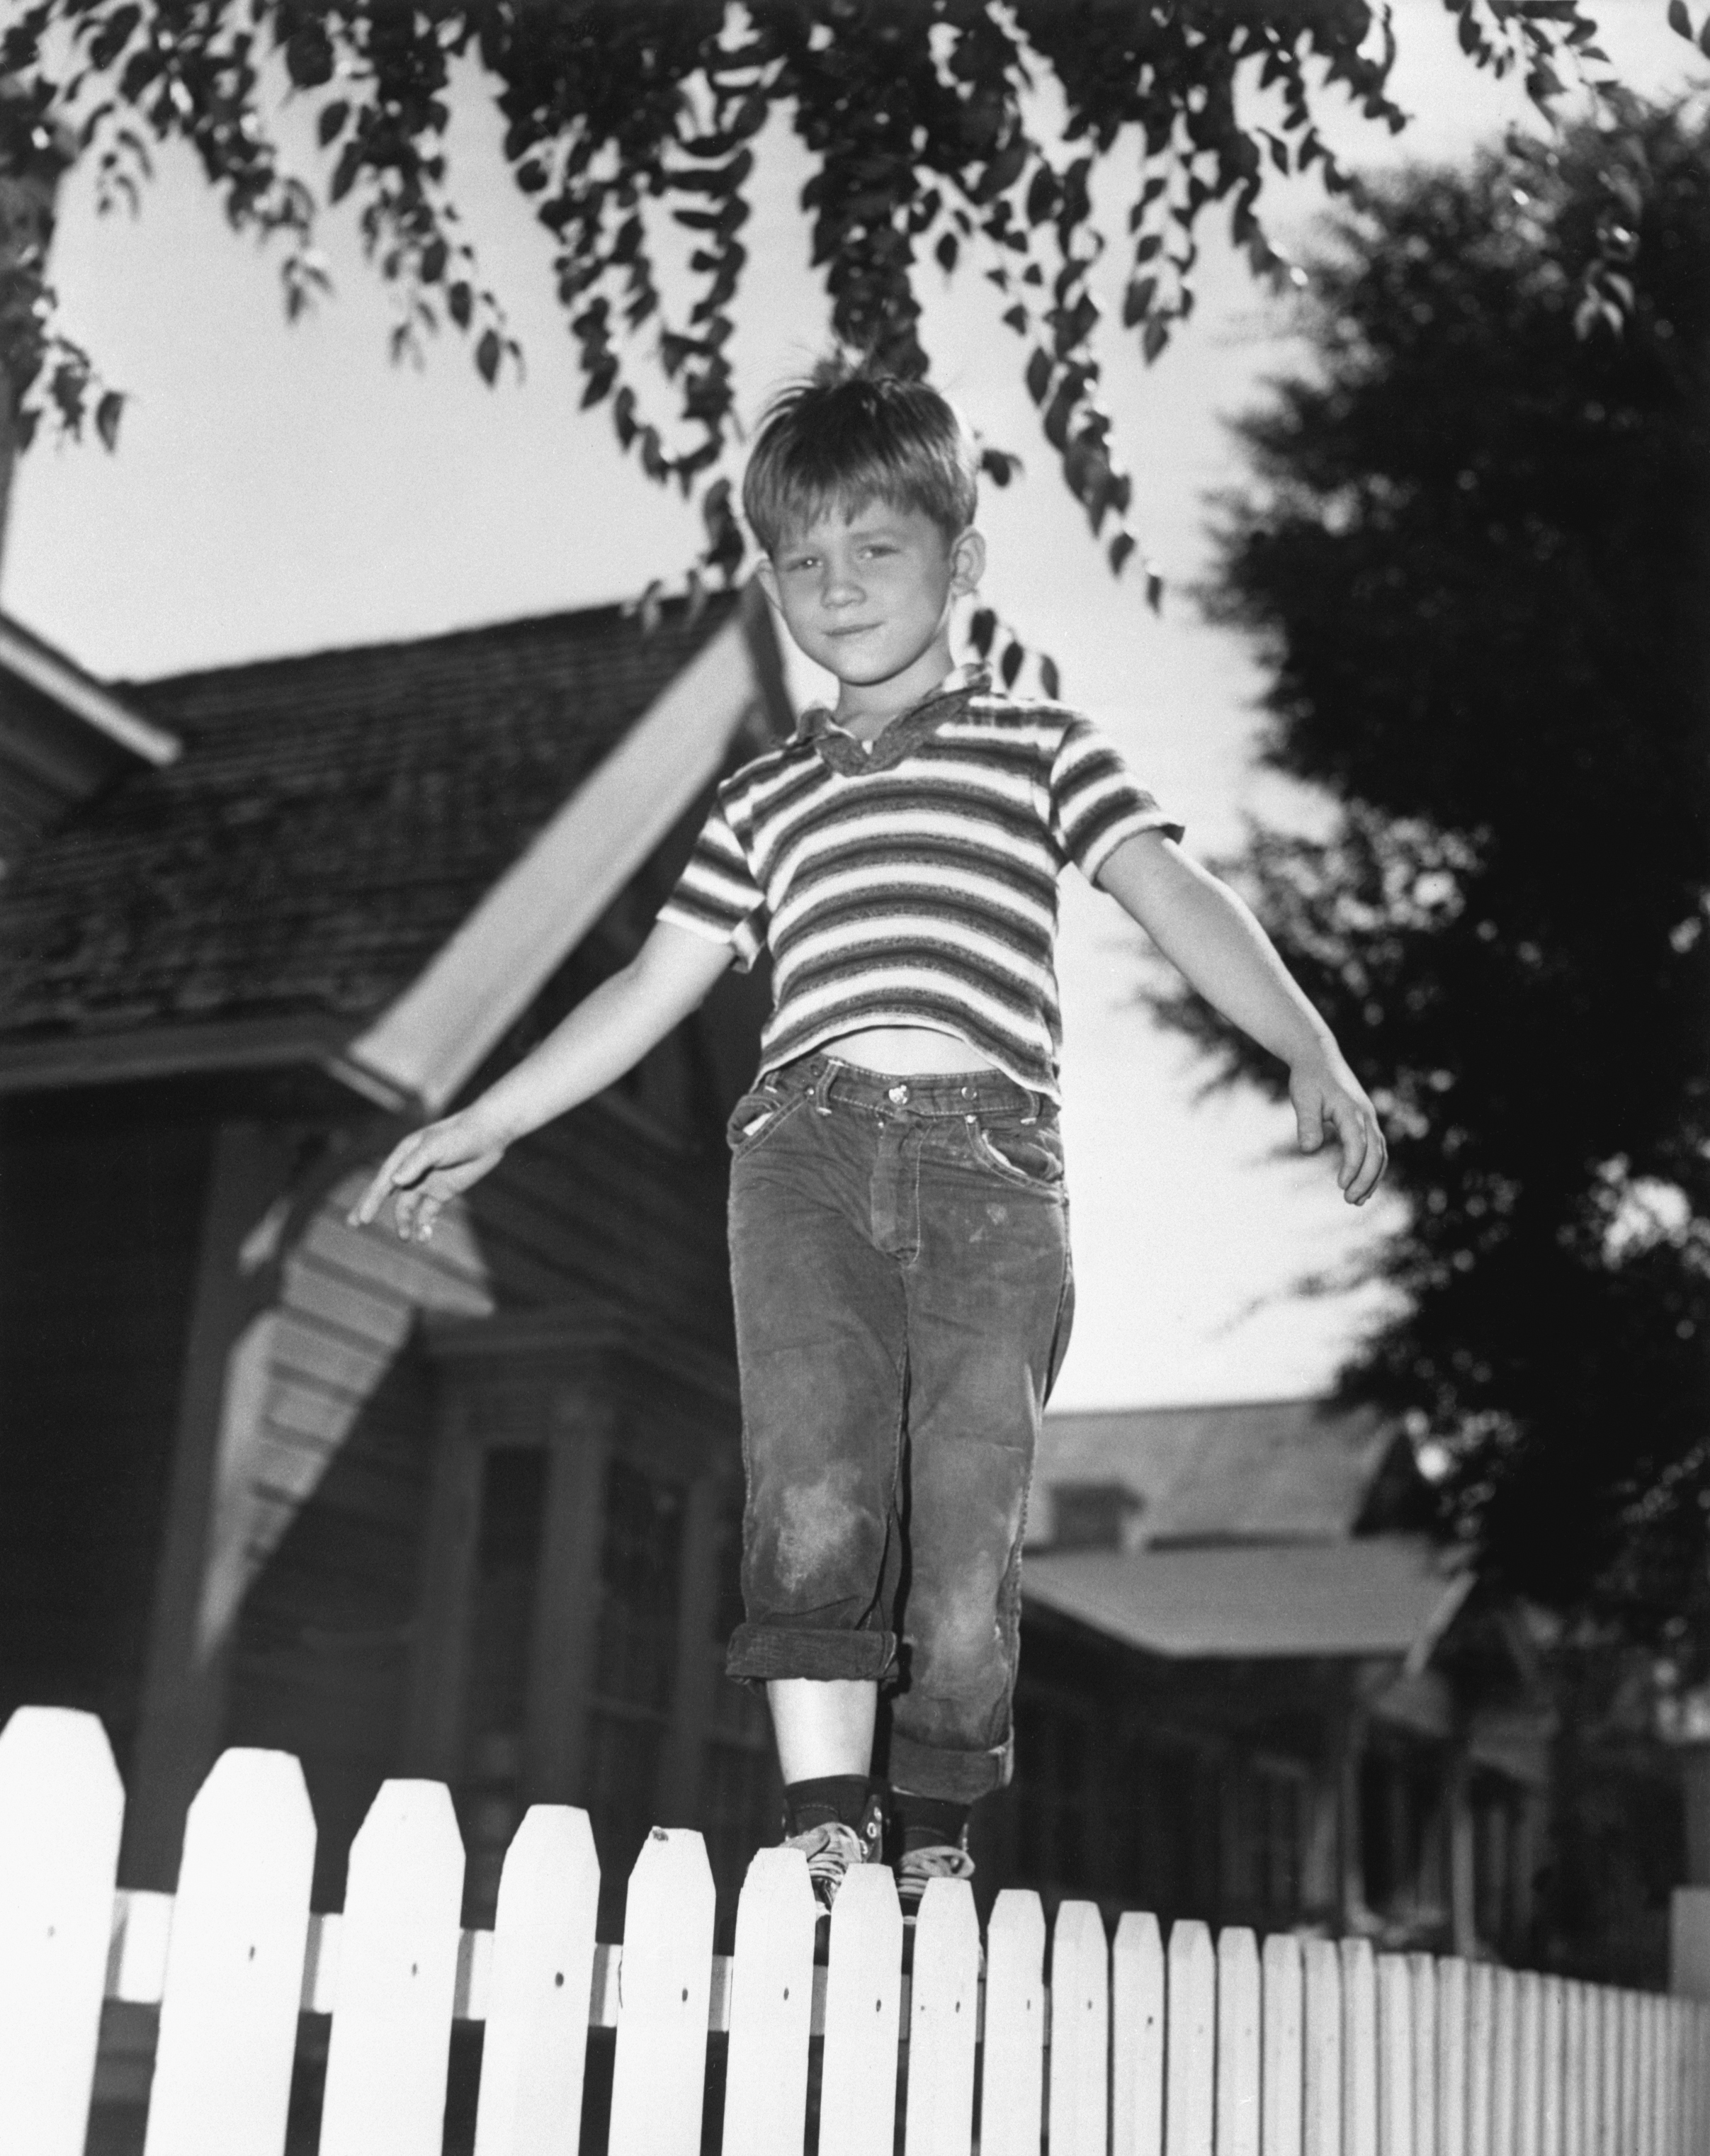 Ron Howard as Opie on "The Andy Griffith Show" in 1962. | Source: Getty Images